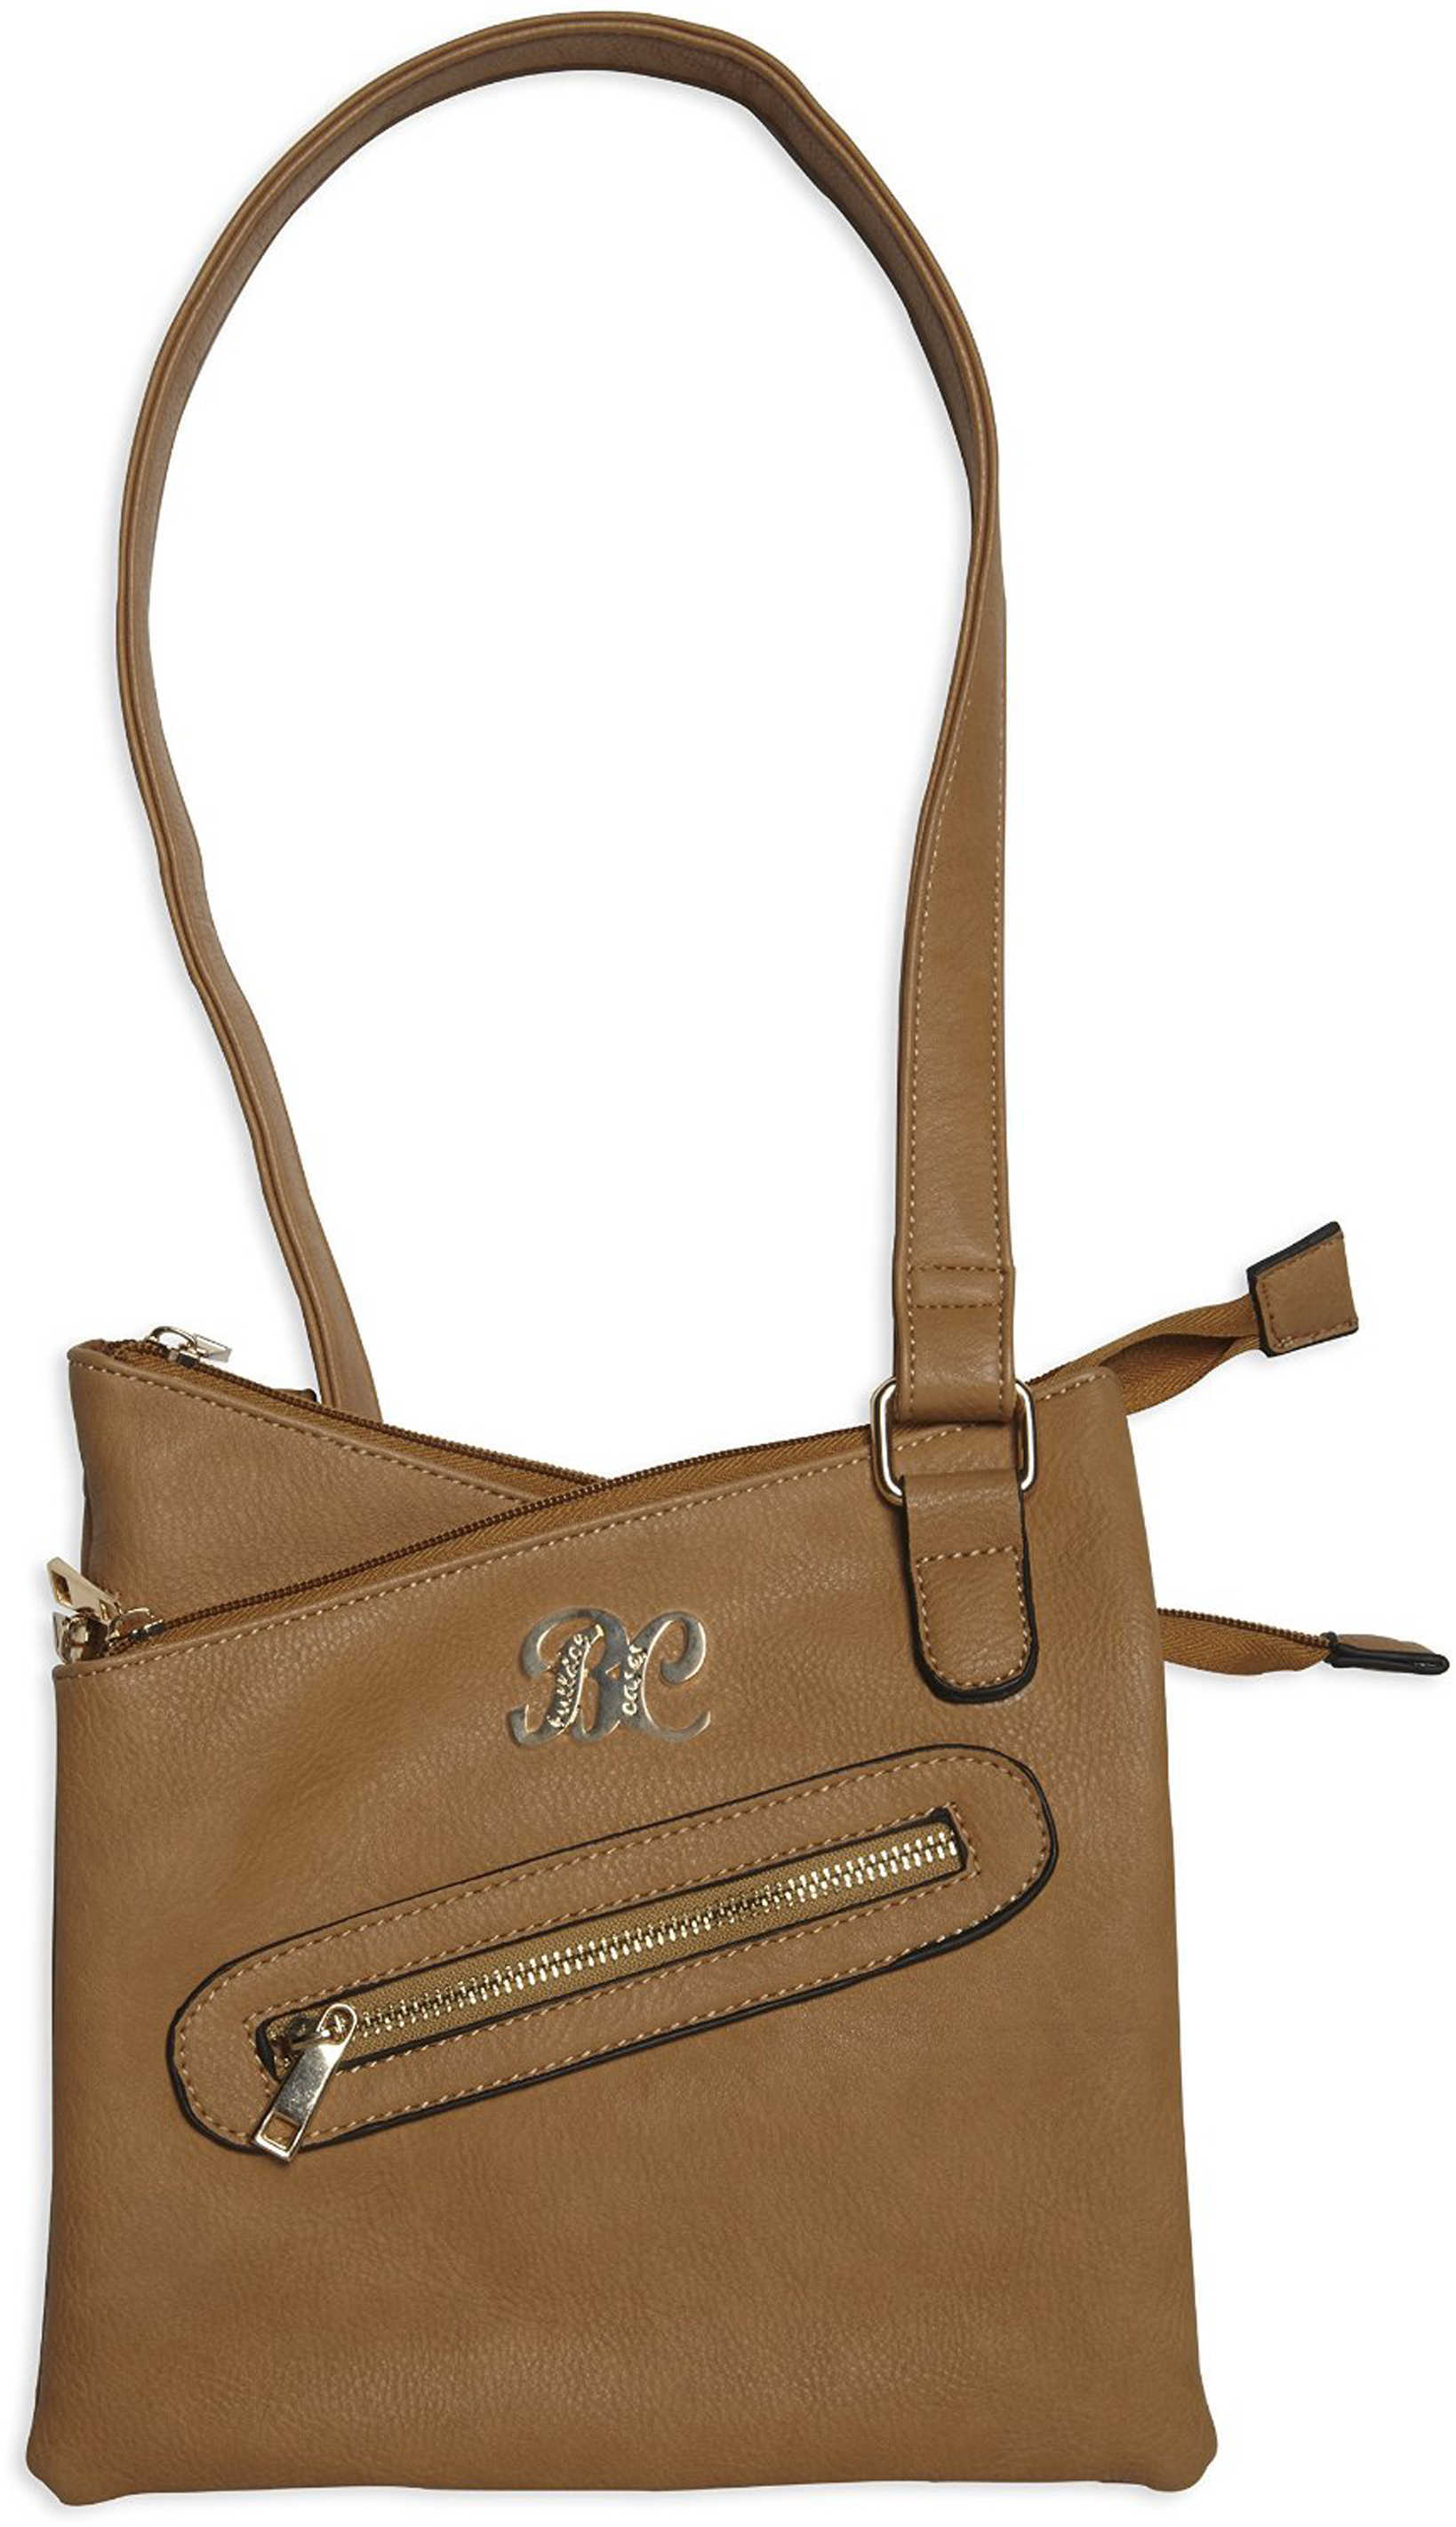 Bulldog Concealed Carrie Purse Cross Body Style Tan